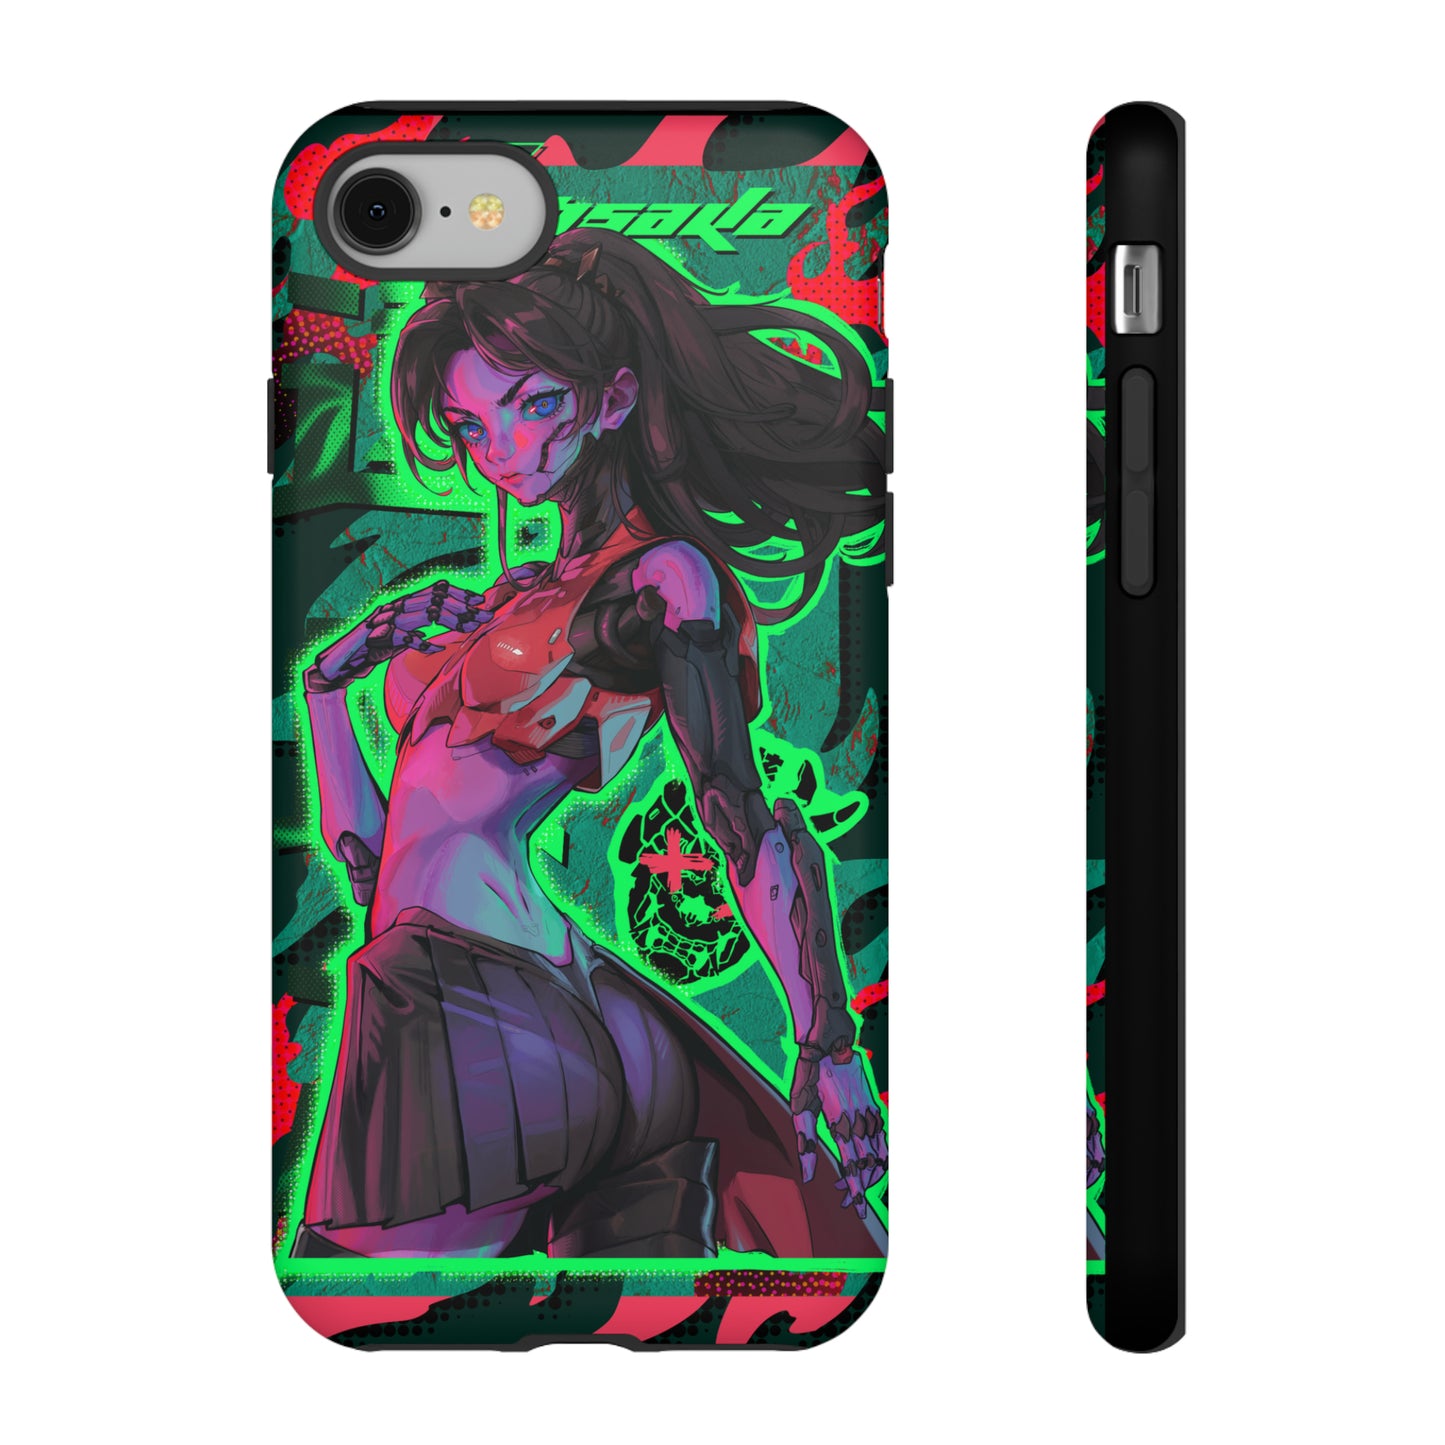 Rin iPhone Cases